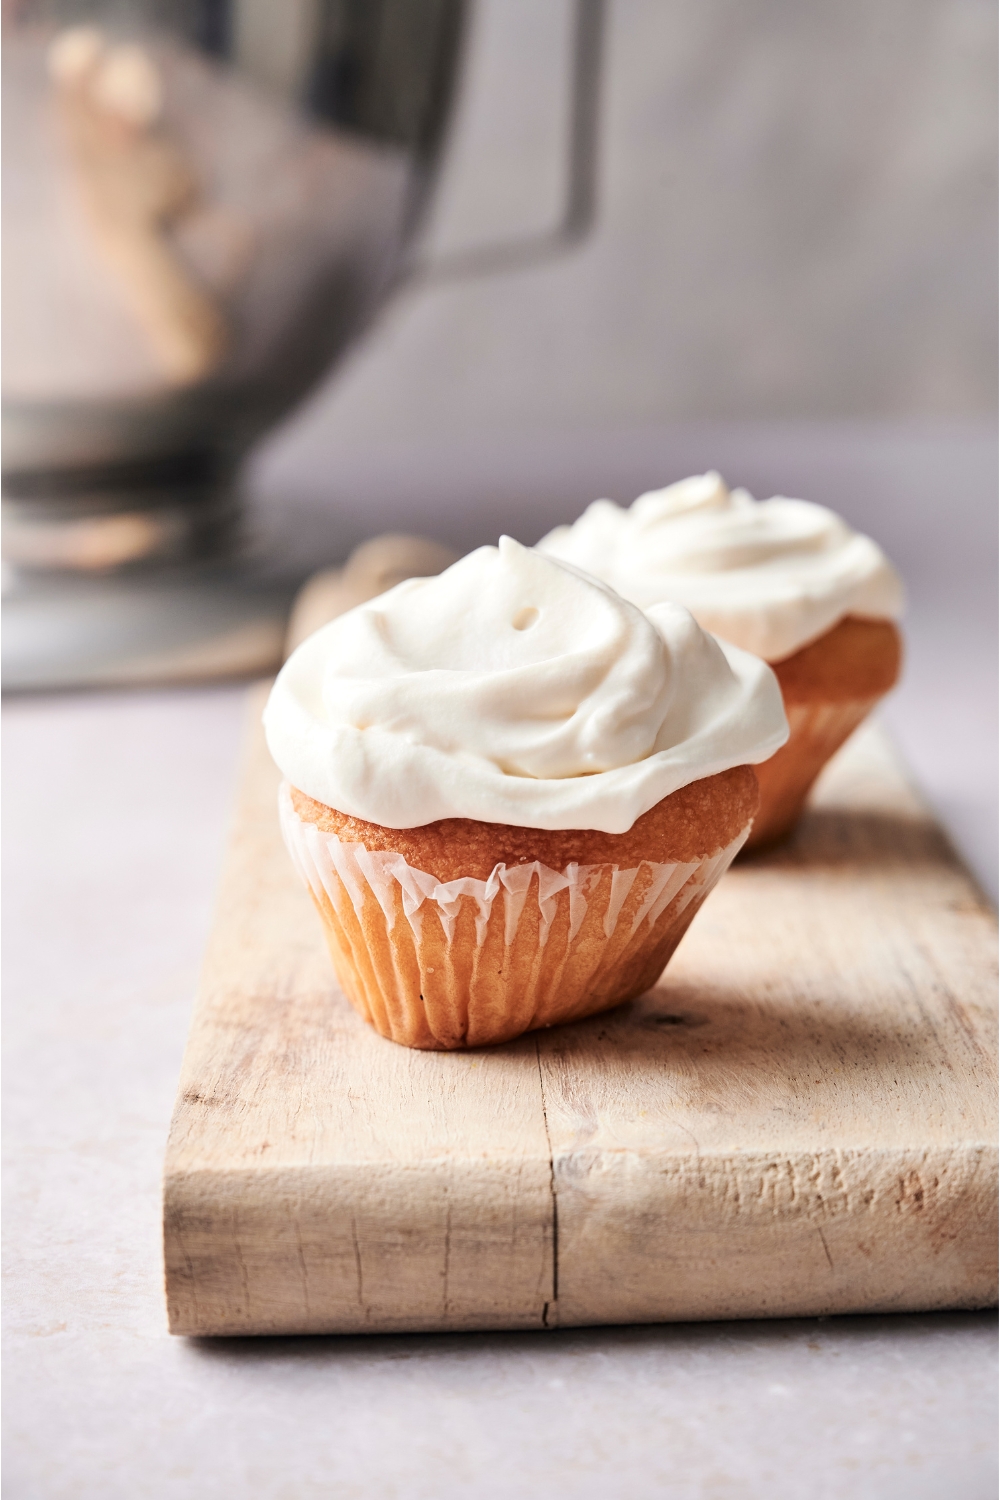 Two cupcakes with creme fraiche frosting sitting on a wooden board.